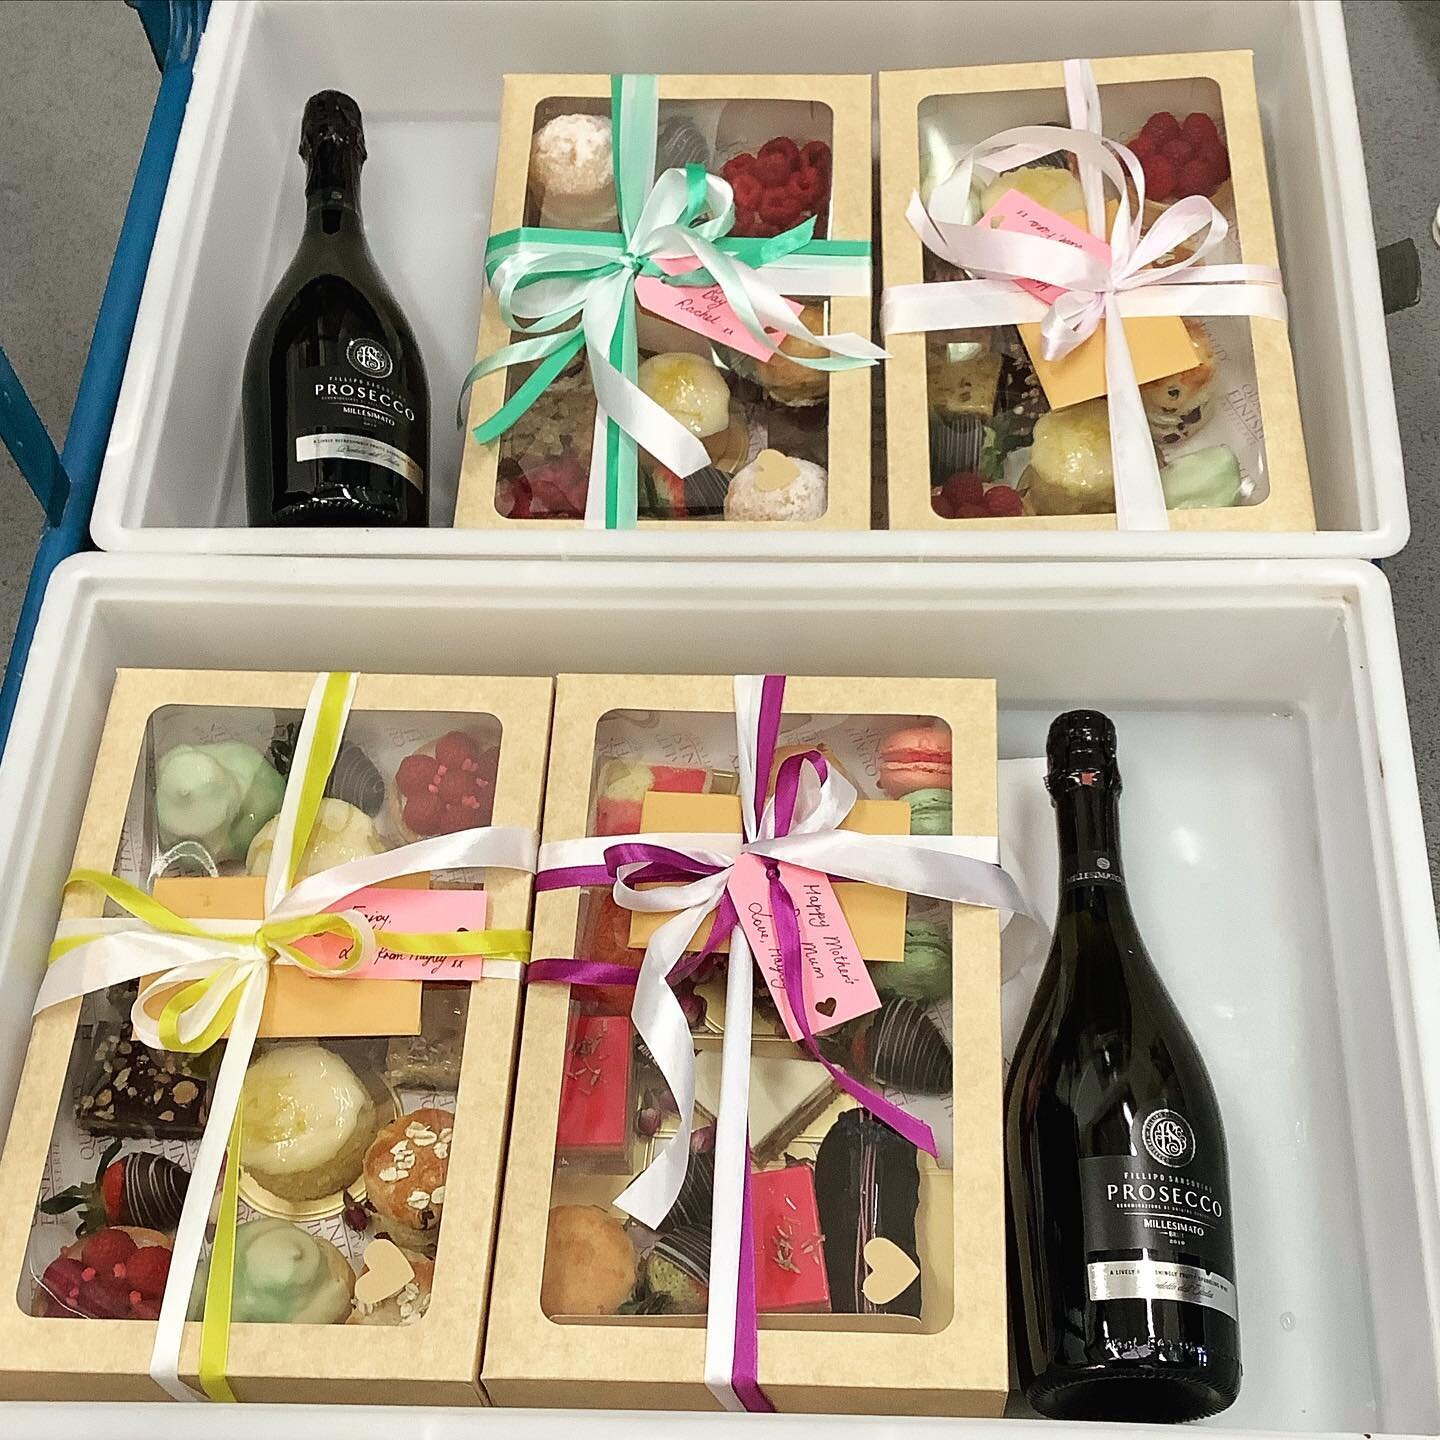 Mother&rsquo;s Day afternoon tea boxes ready for delivery this morning. Happy Mother&rsquo;s Day to all our wonderful mums and mother-figures! 🍰🌸 #mothersday #mum #afternoontea #sunday #deliveredtoyourdoor #sweet #yummy #cake #chocolate #prosecco